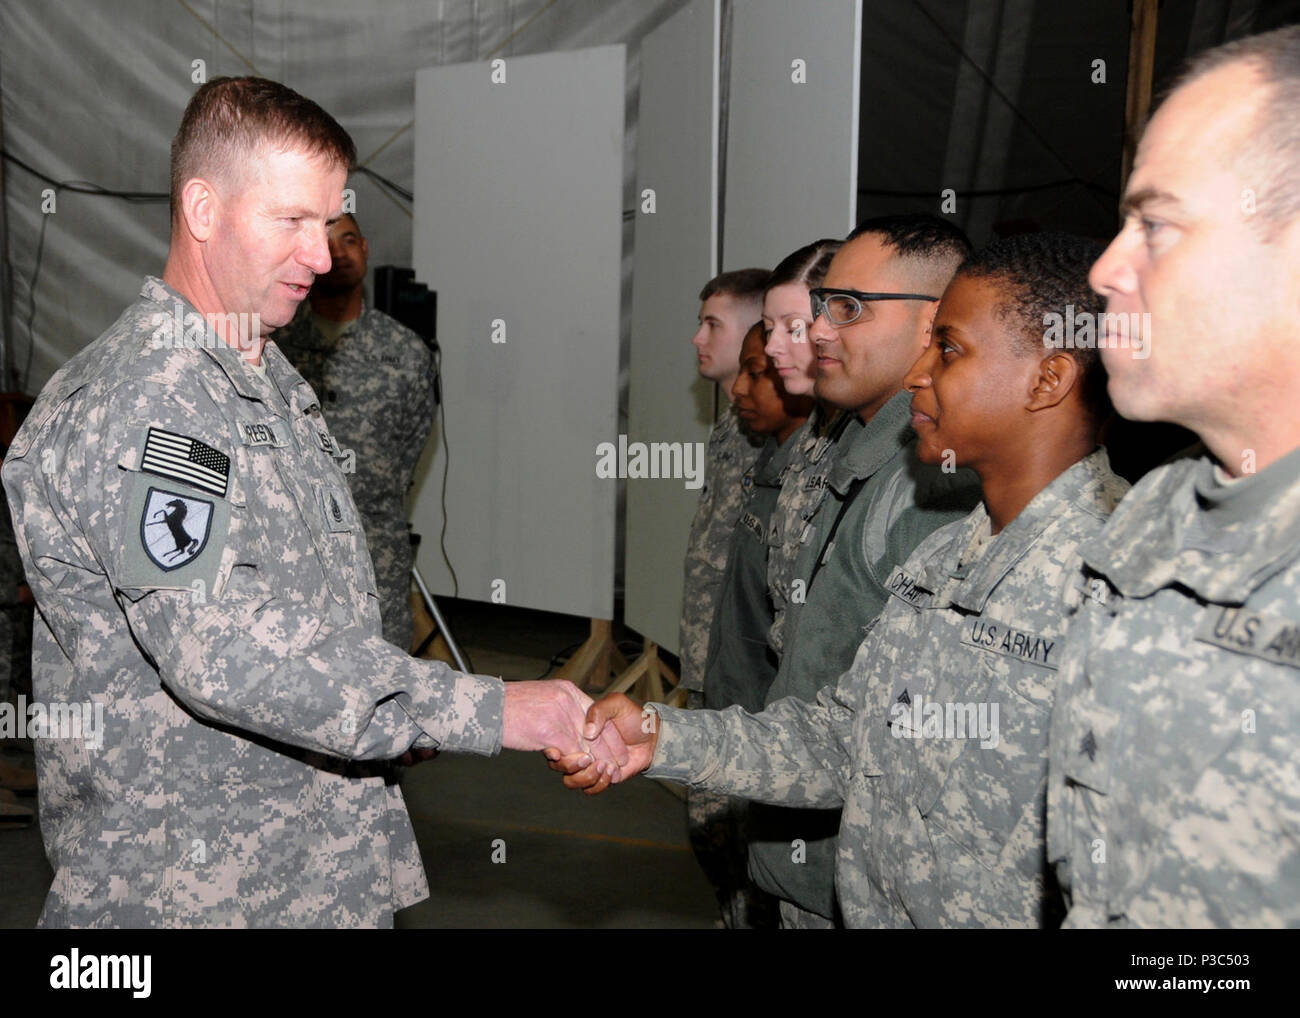 - CAMP EGGERS, Afghanistan – Sergeant Major of the Army Kenneth Preston shakes hands with Soldiers of NATO Training Mission – Afghanistan at Camp Eggers Dec. 7, 2009. During his visit, Preston responded to the Soldiers questions and concerns, presented ceremonial coins, and thanked them for their service. Stock Photo